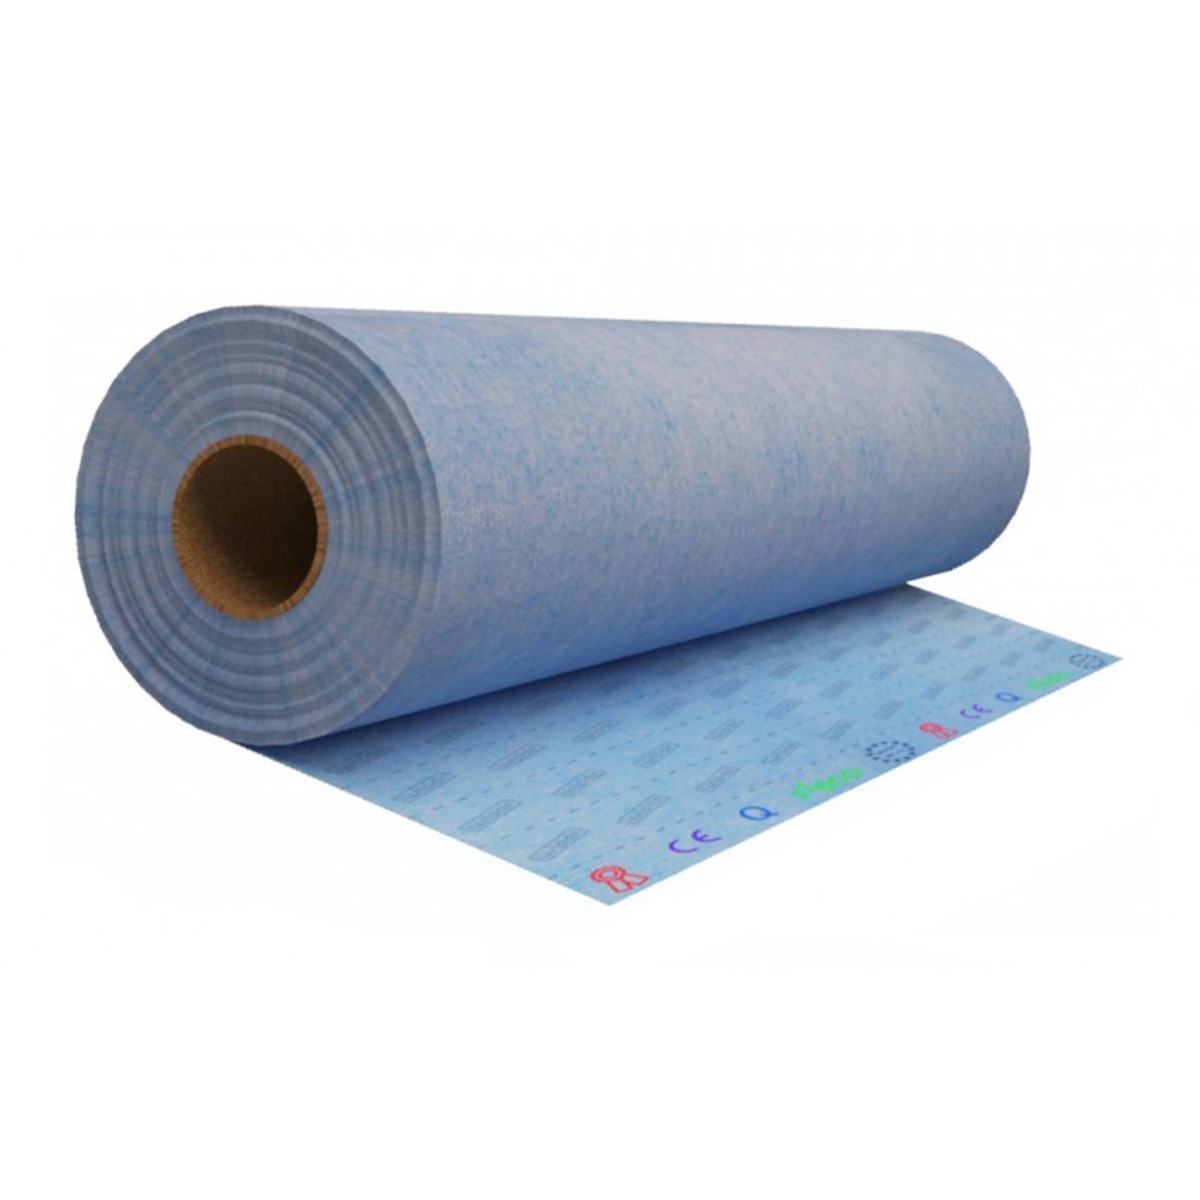 WHAT ISOL ONE SEALING MAT IS